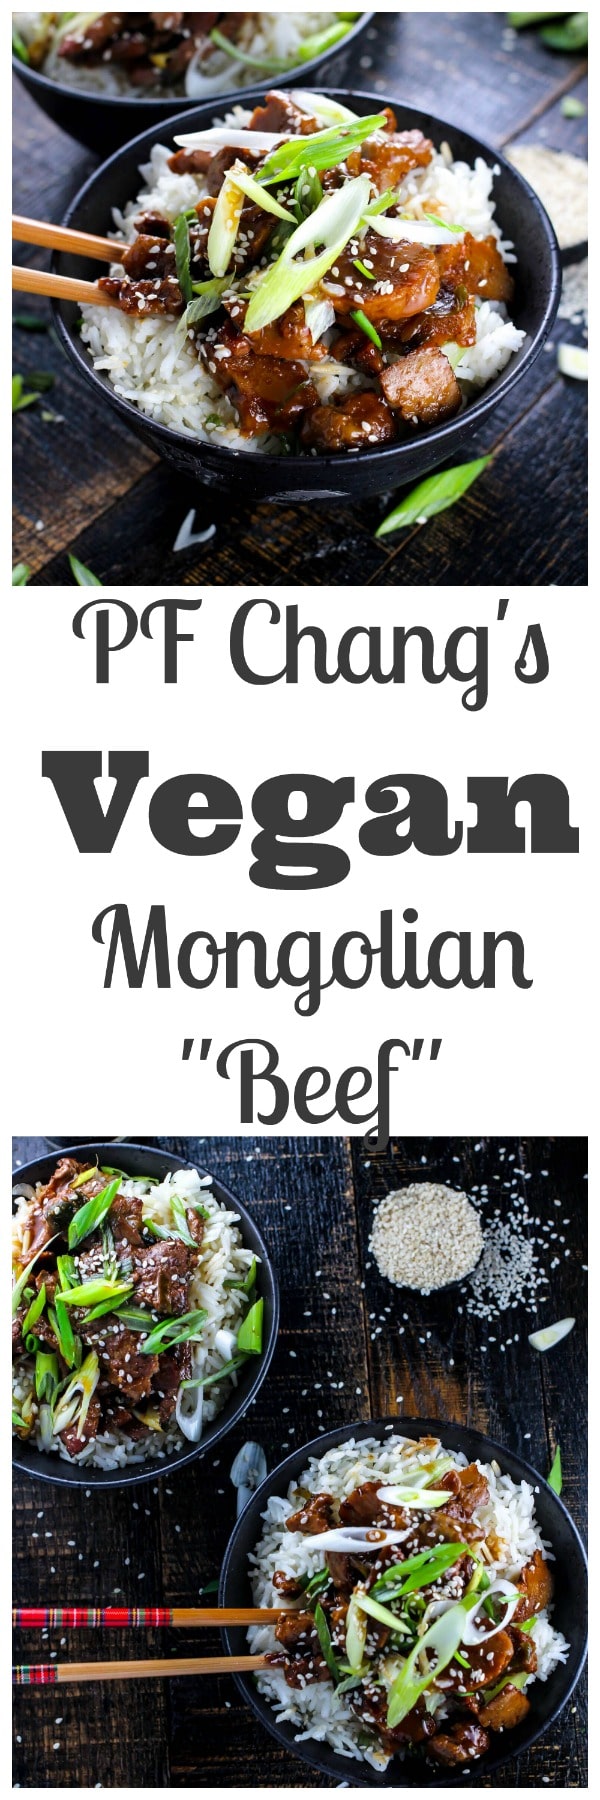 Pf Chang S Vegan Mongolian Beef Girl And The Kitchen,Saltwater Fish Tank Coral